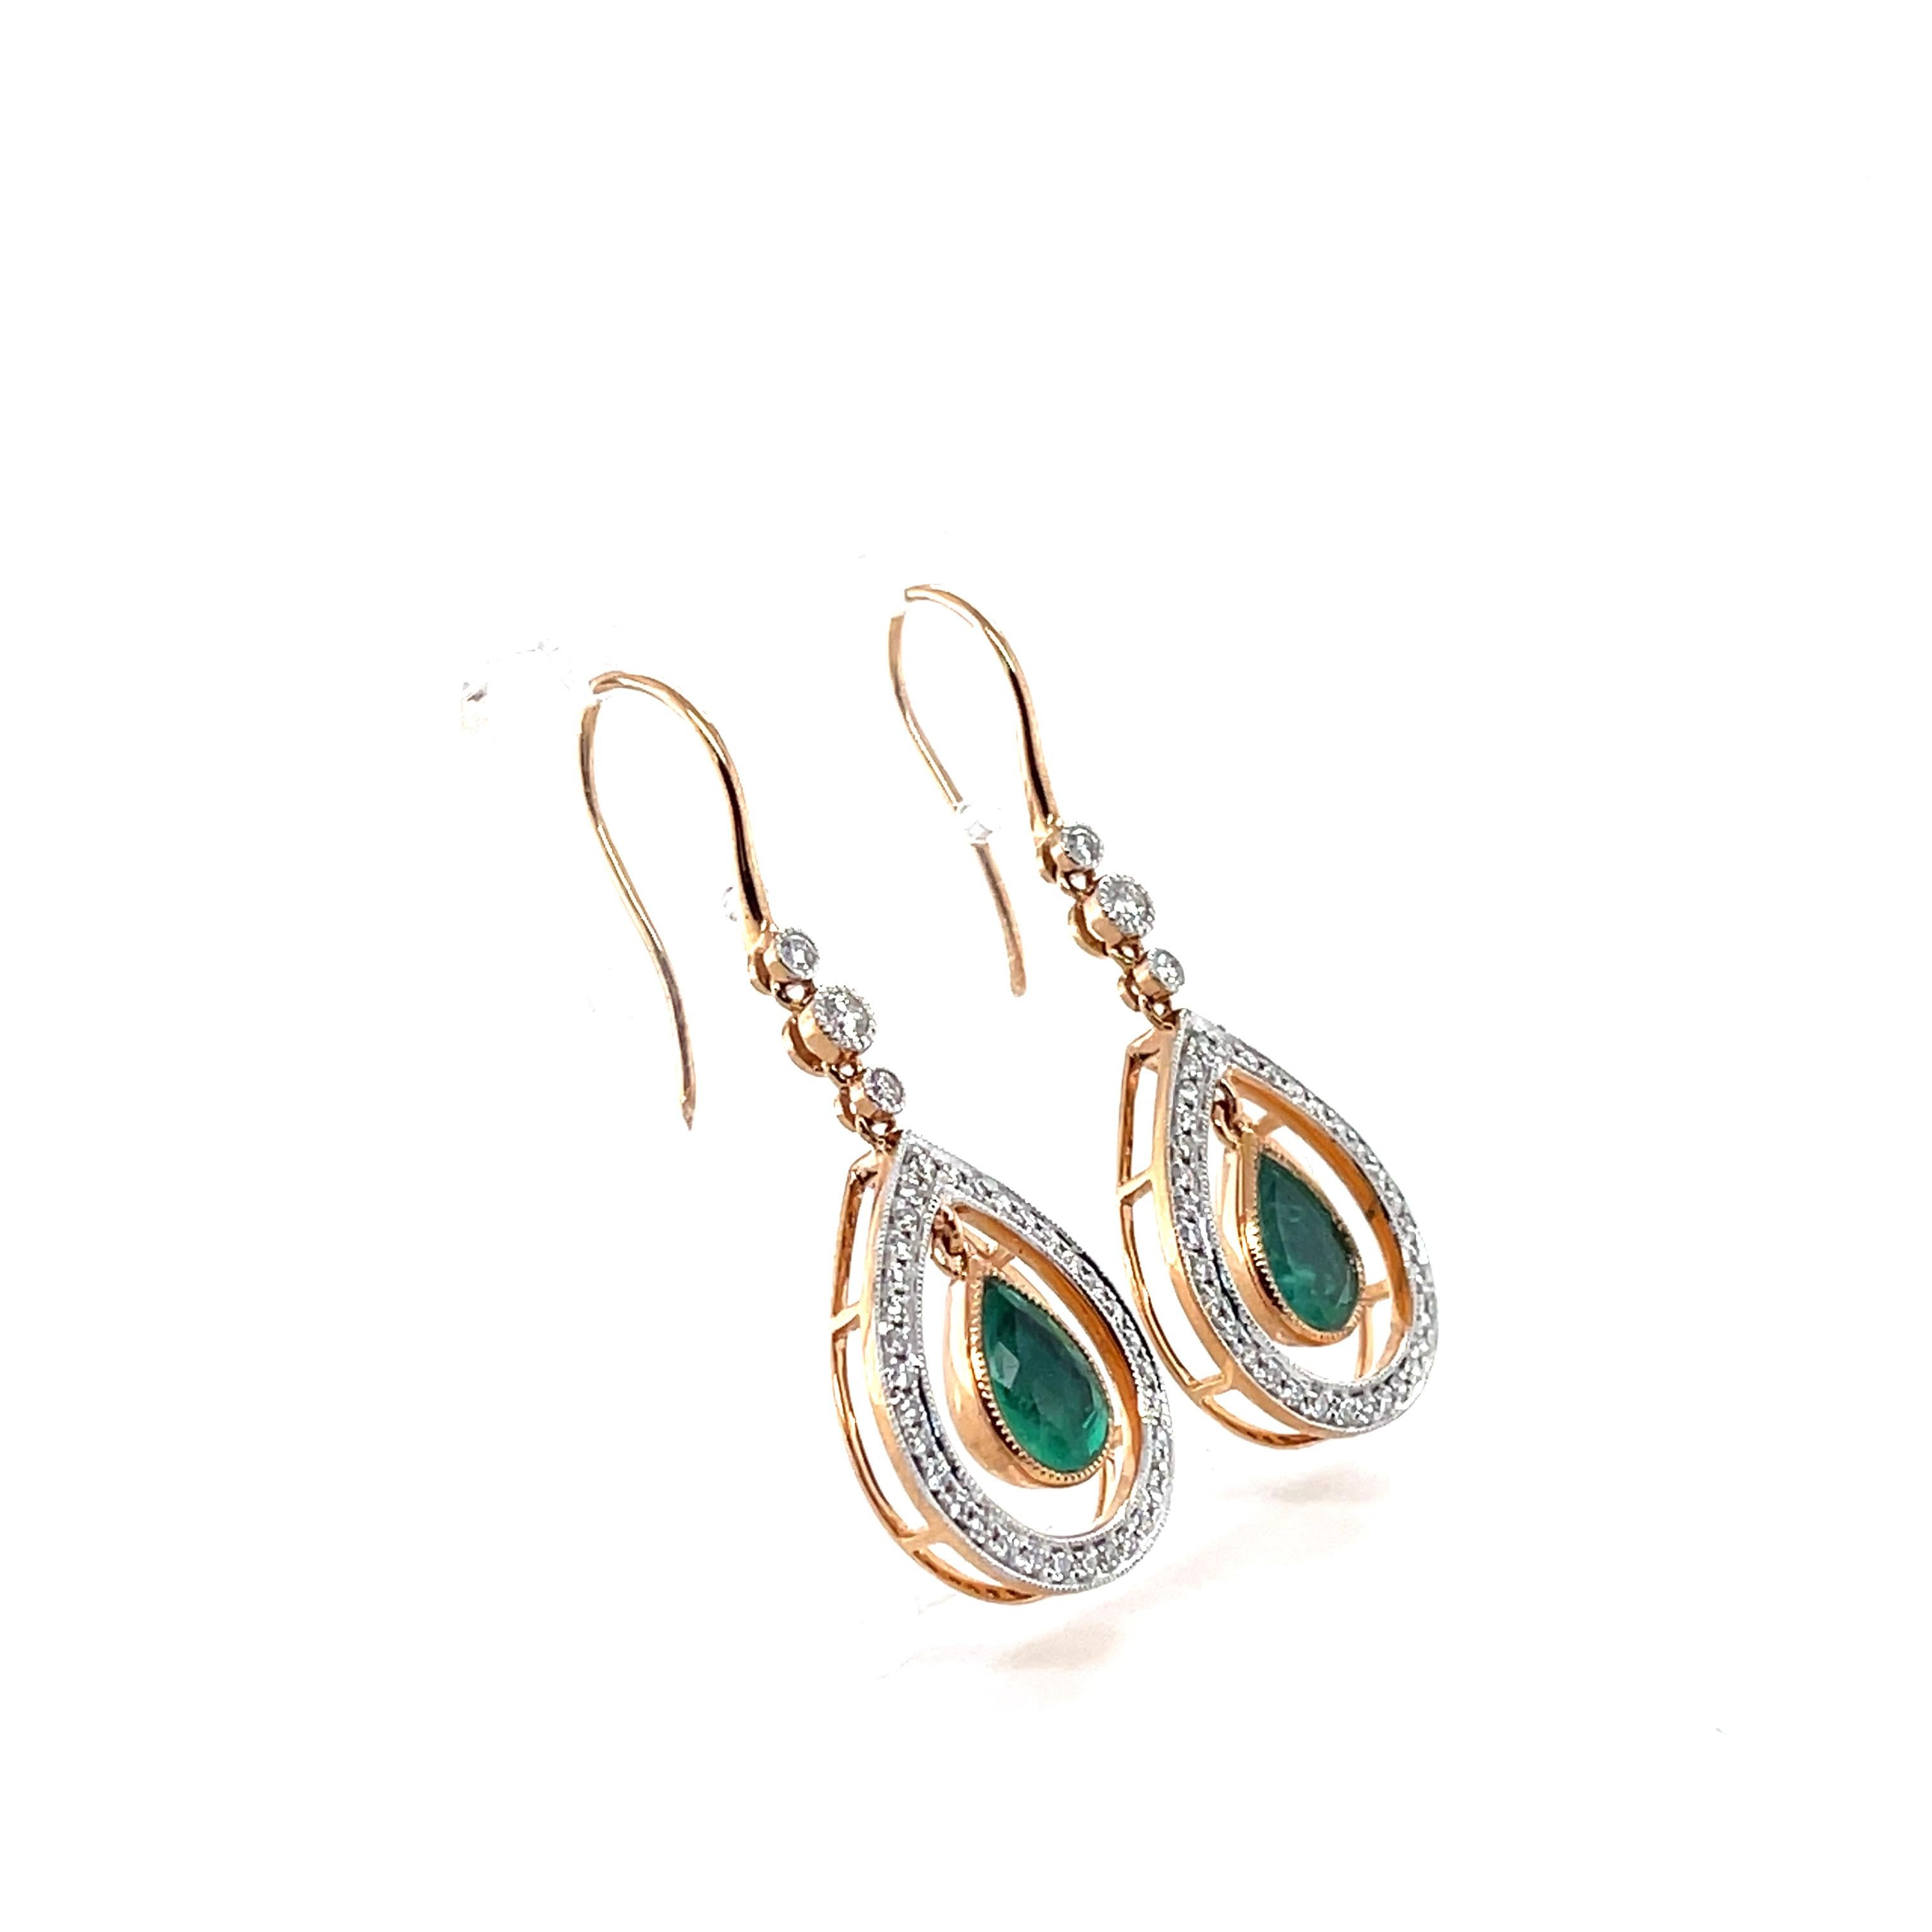 A set of Pear cut emerald and round brilliant cut diamond earrings crafted into a Sheppard's hooks designed earring pair.

Emerald Weight : 2.18ct
Emerald Colour/Grade: 